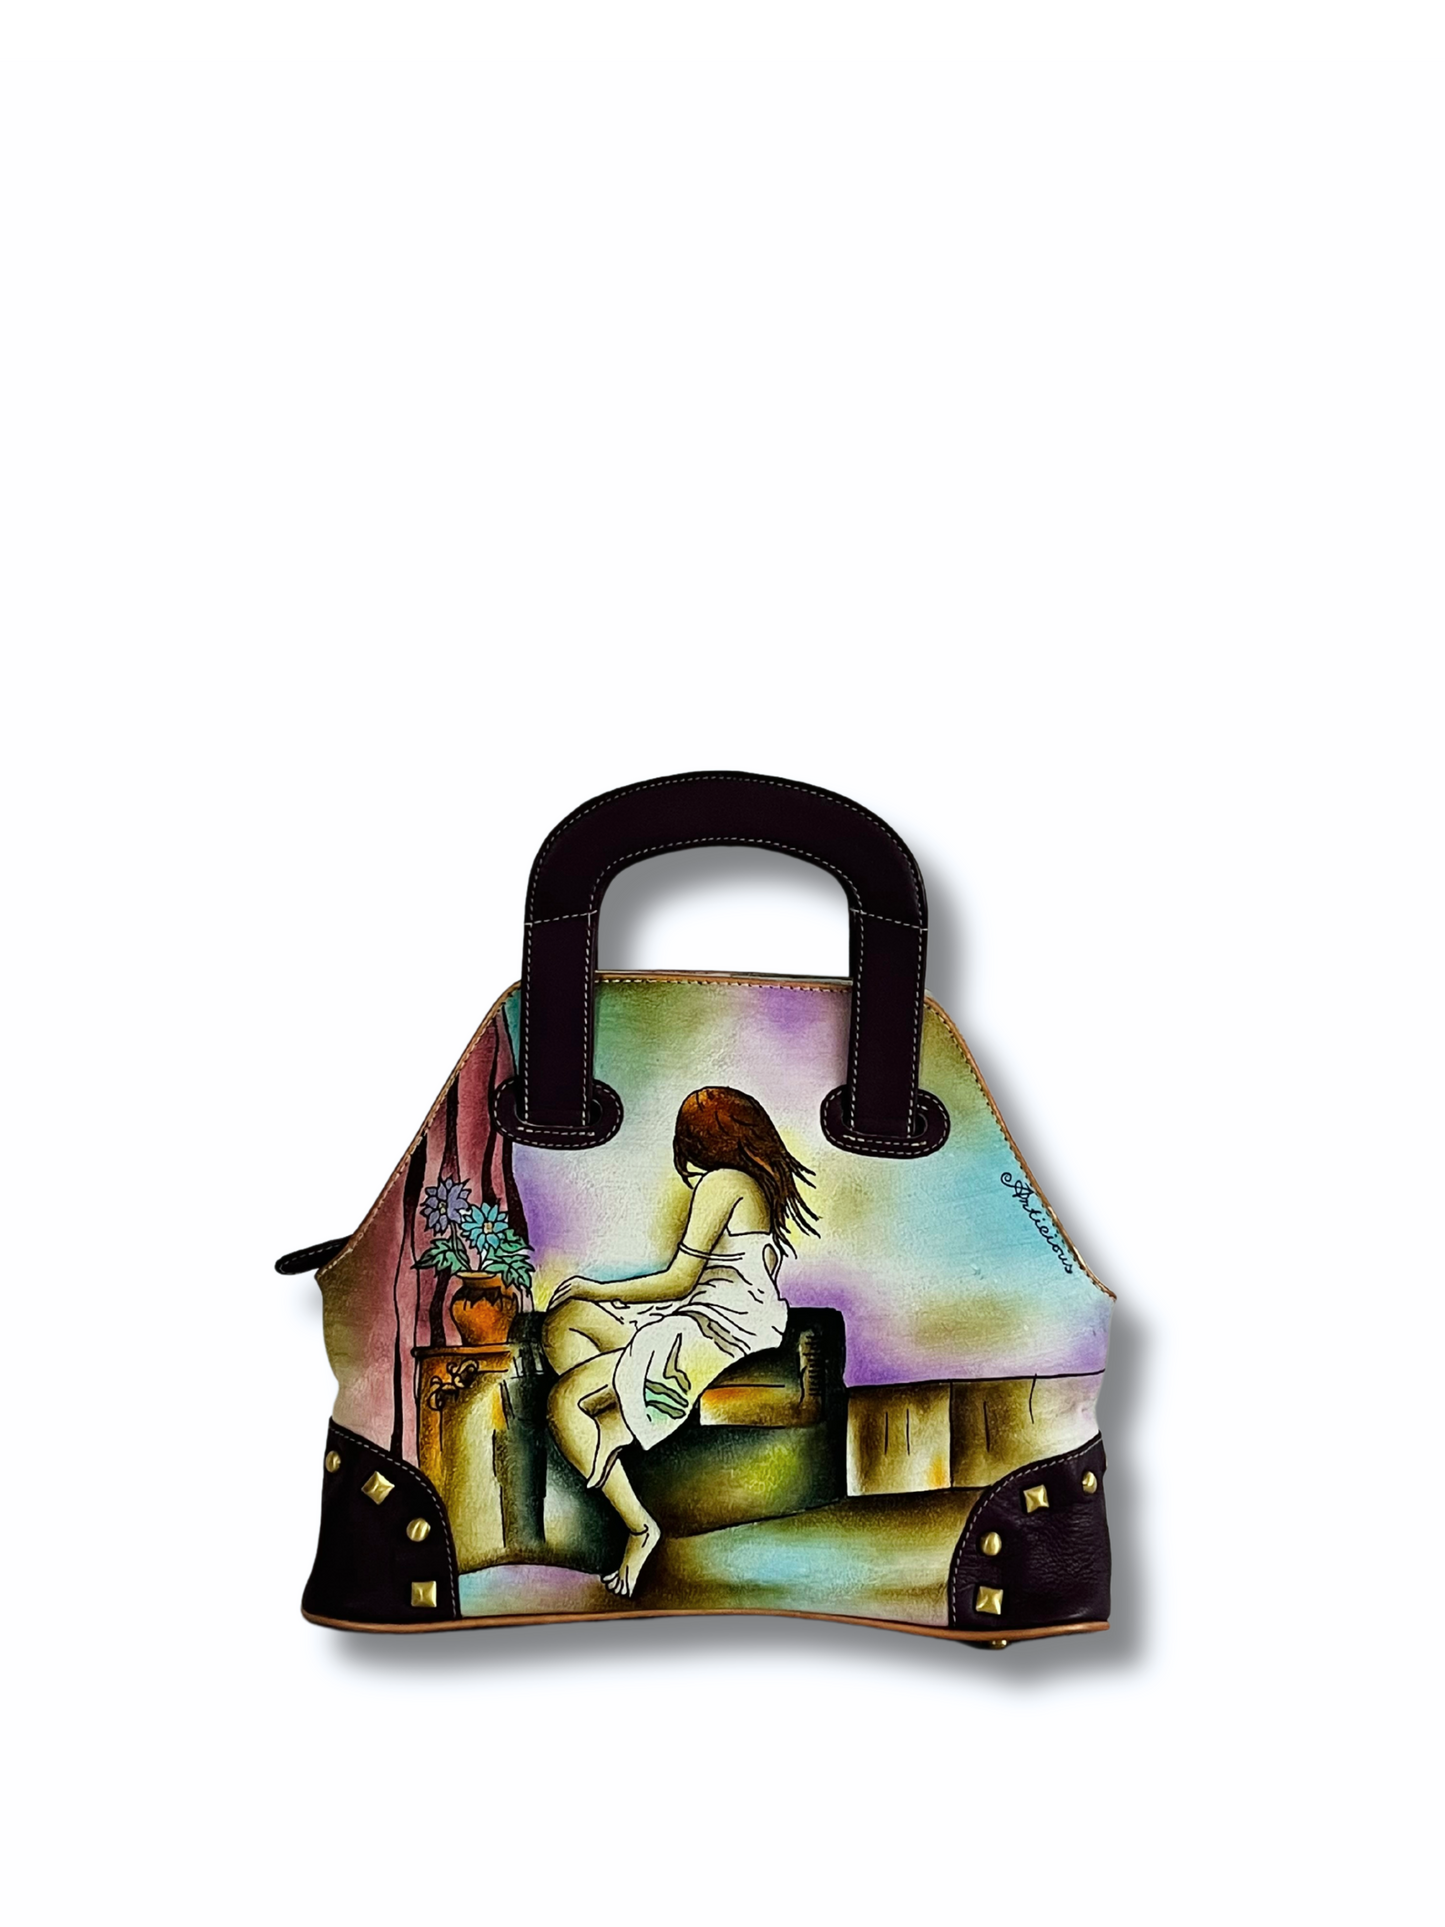 Deep hand painted leather bag